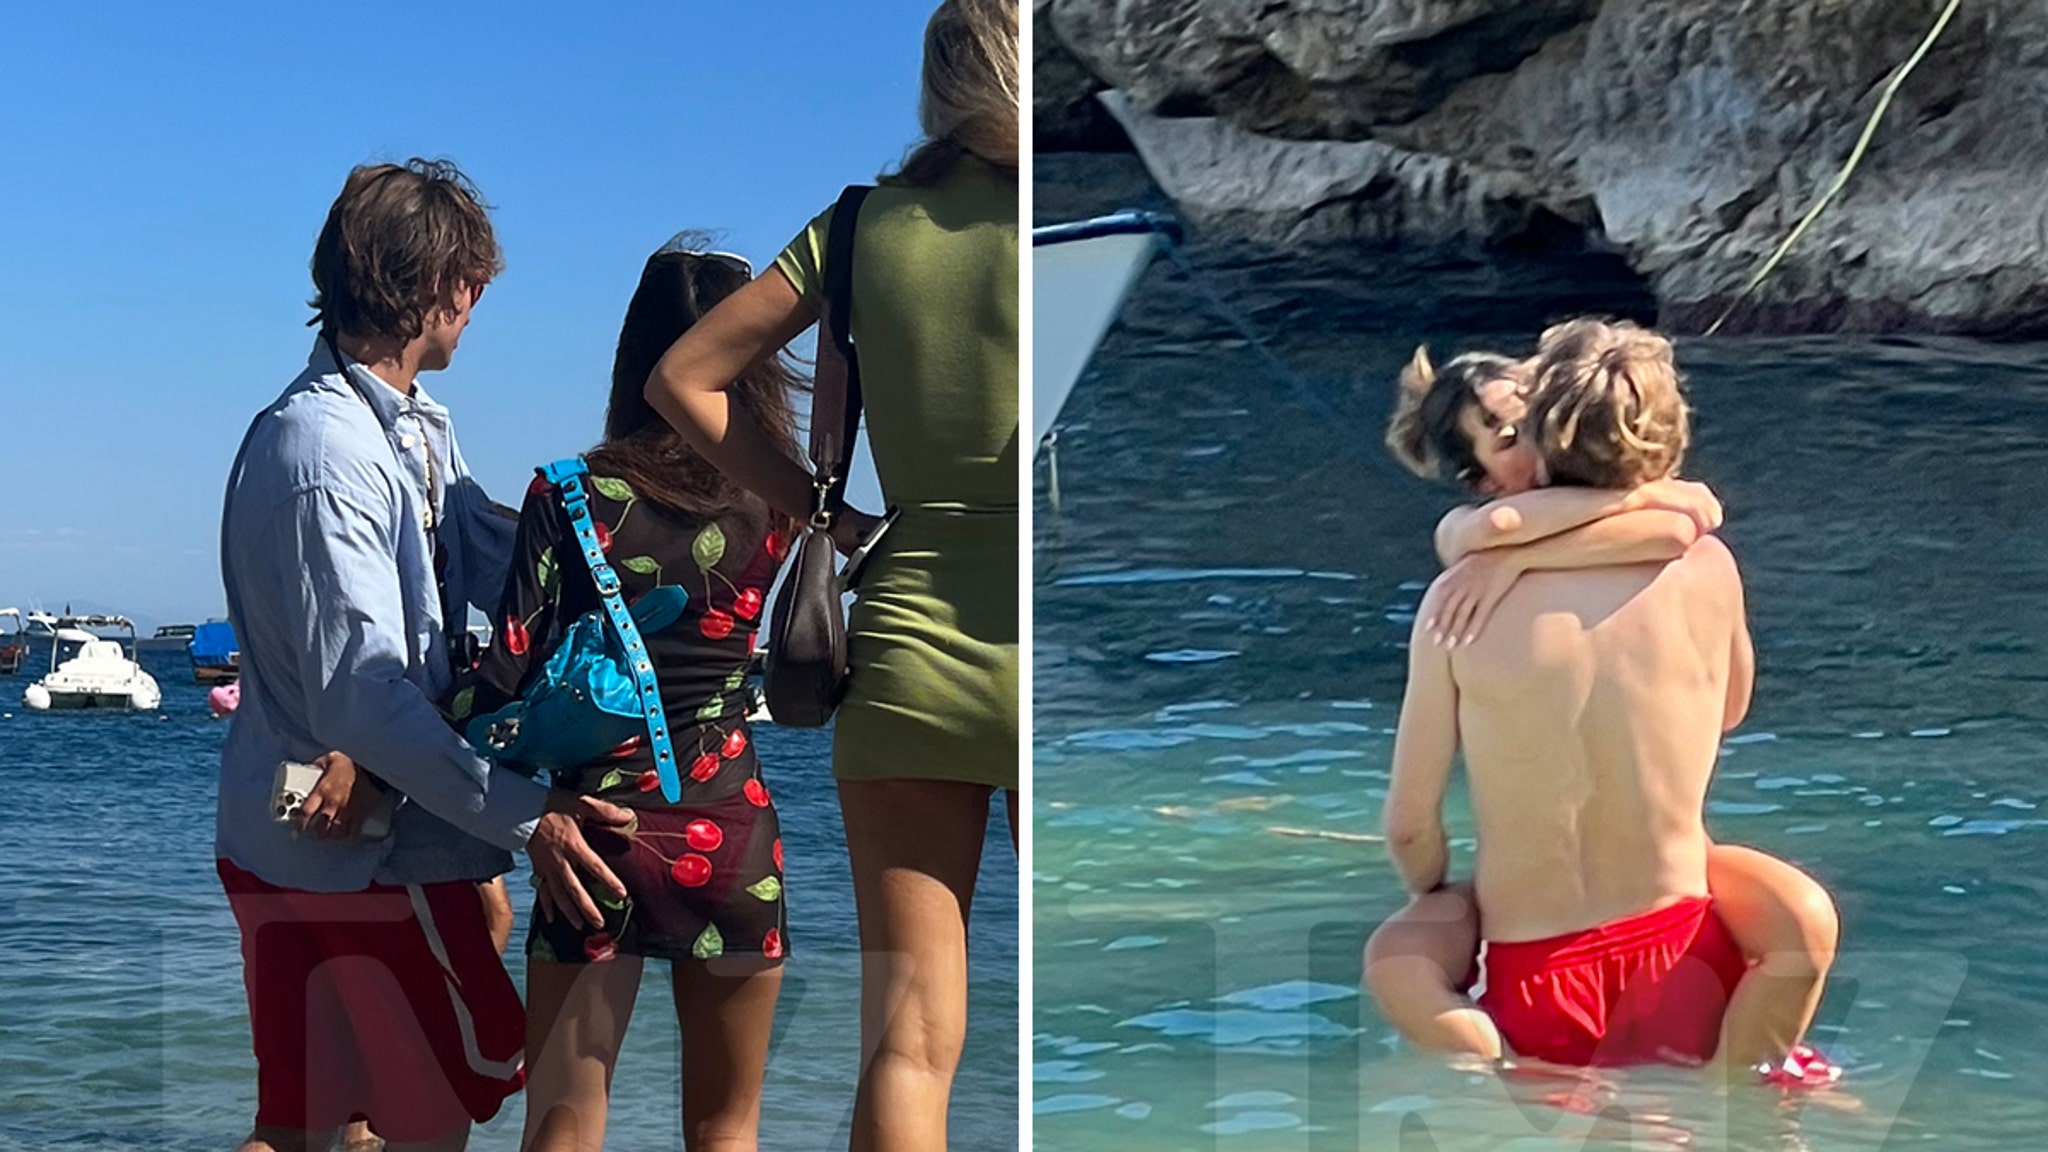 Ansel Elgort Makes Out with Woman in Italy Amid Breakup Rumors with GF